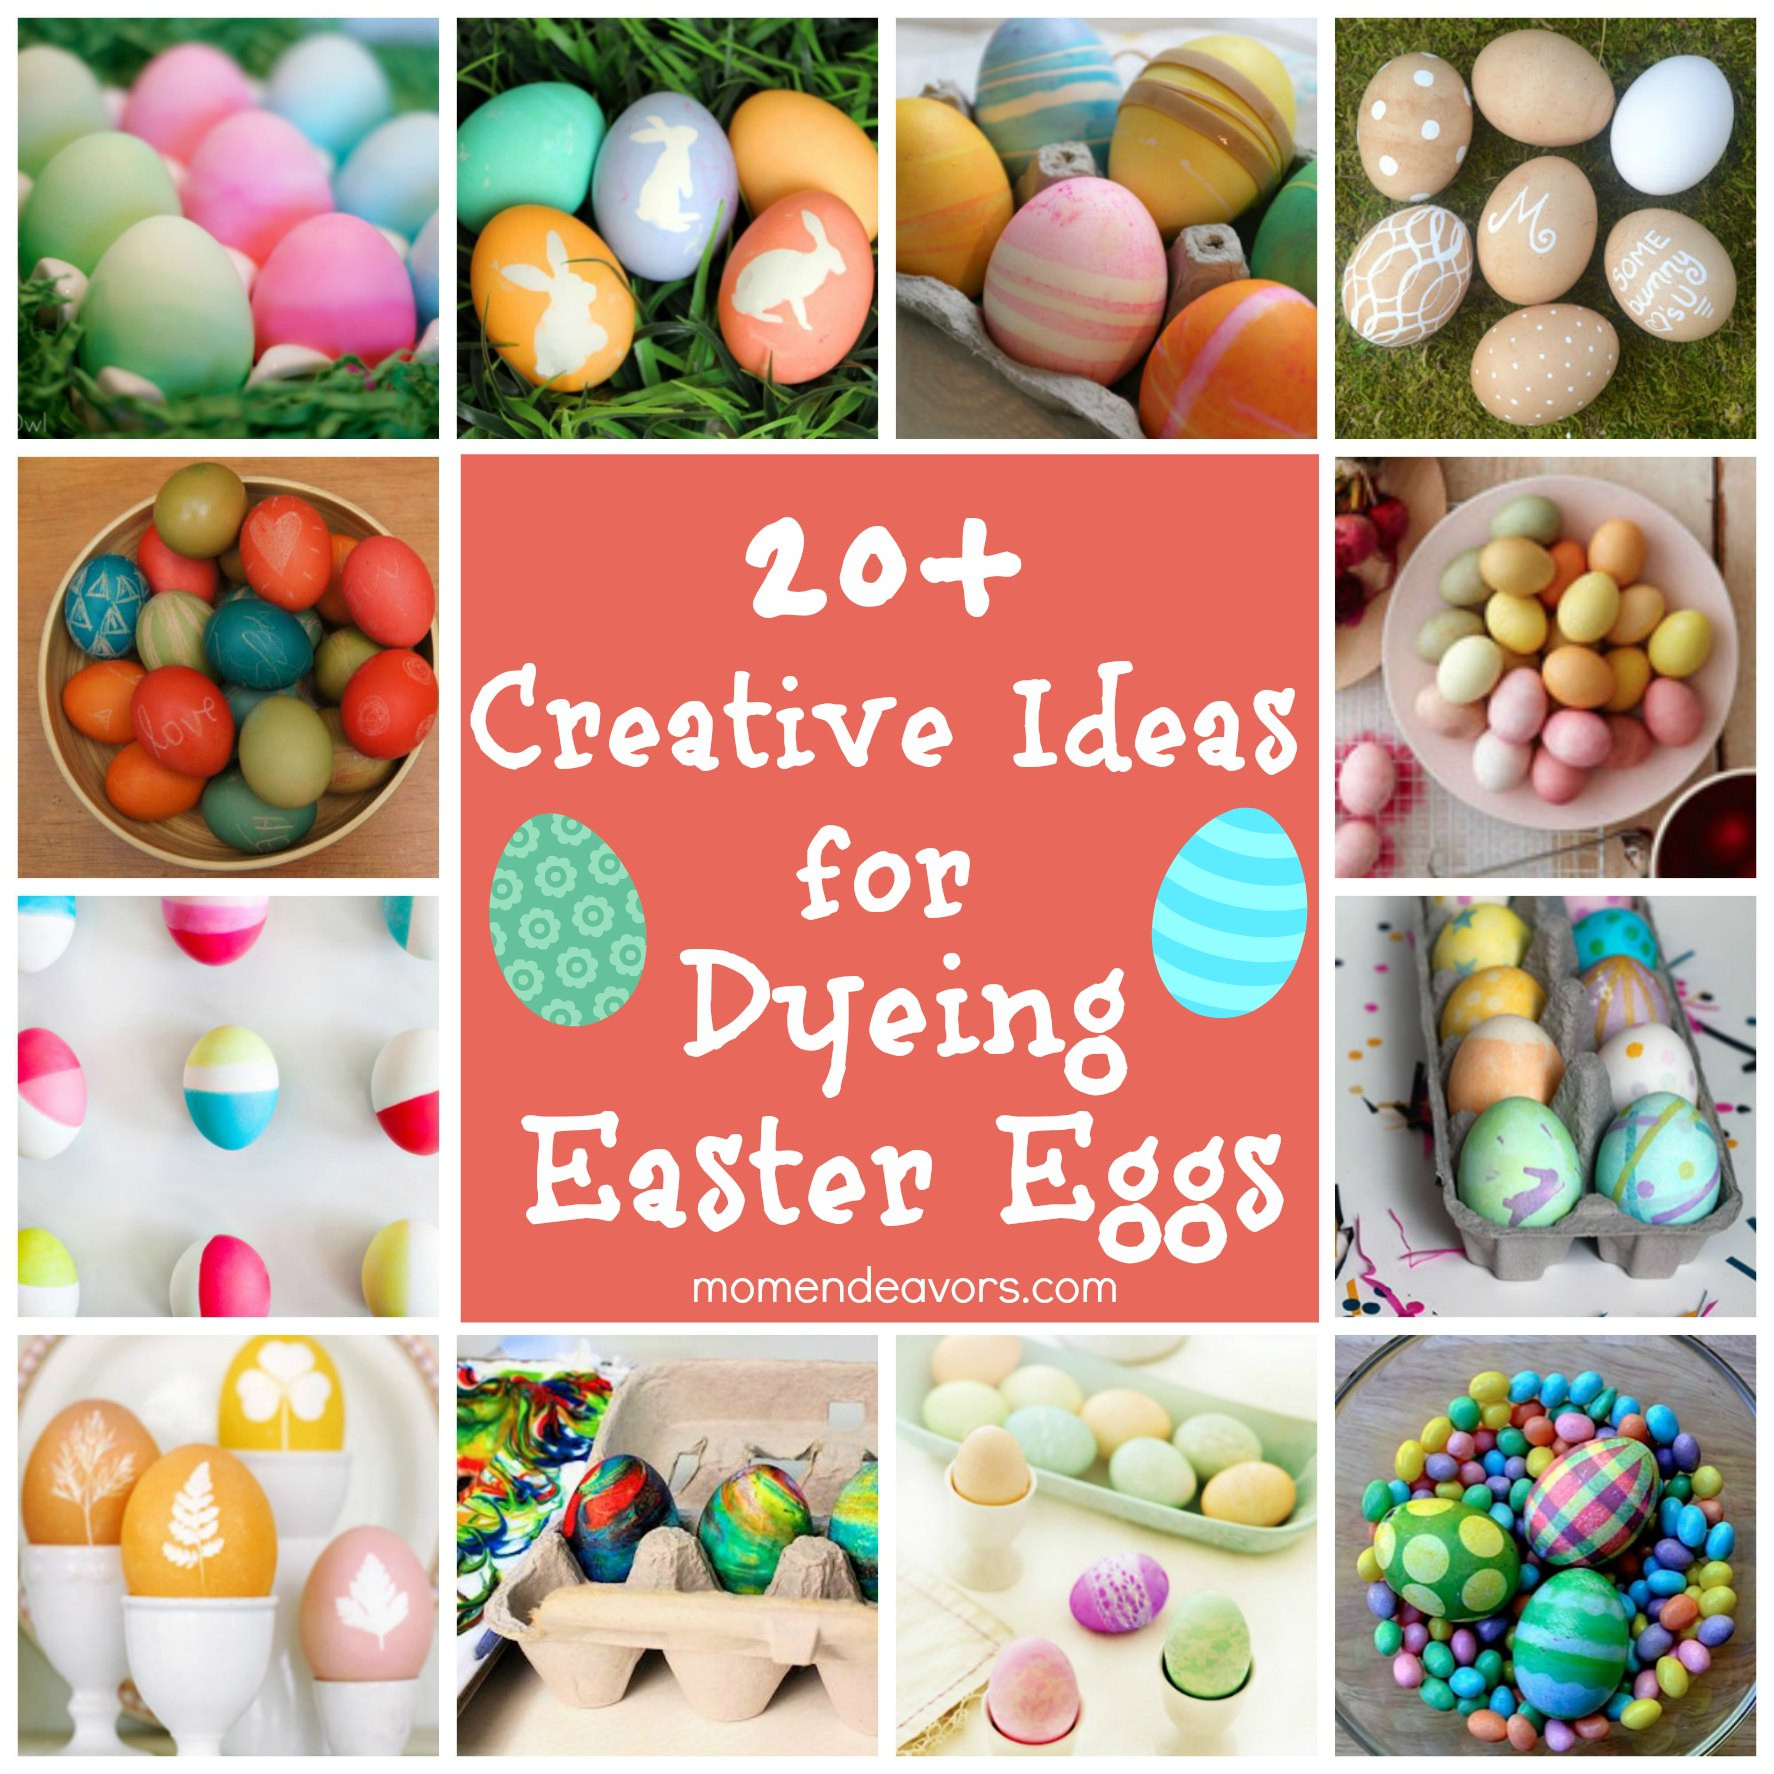 Coloring Easter Egg Ideas
 Dyeing Easter Eggs – 20 Creative Ideas